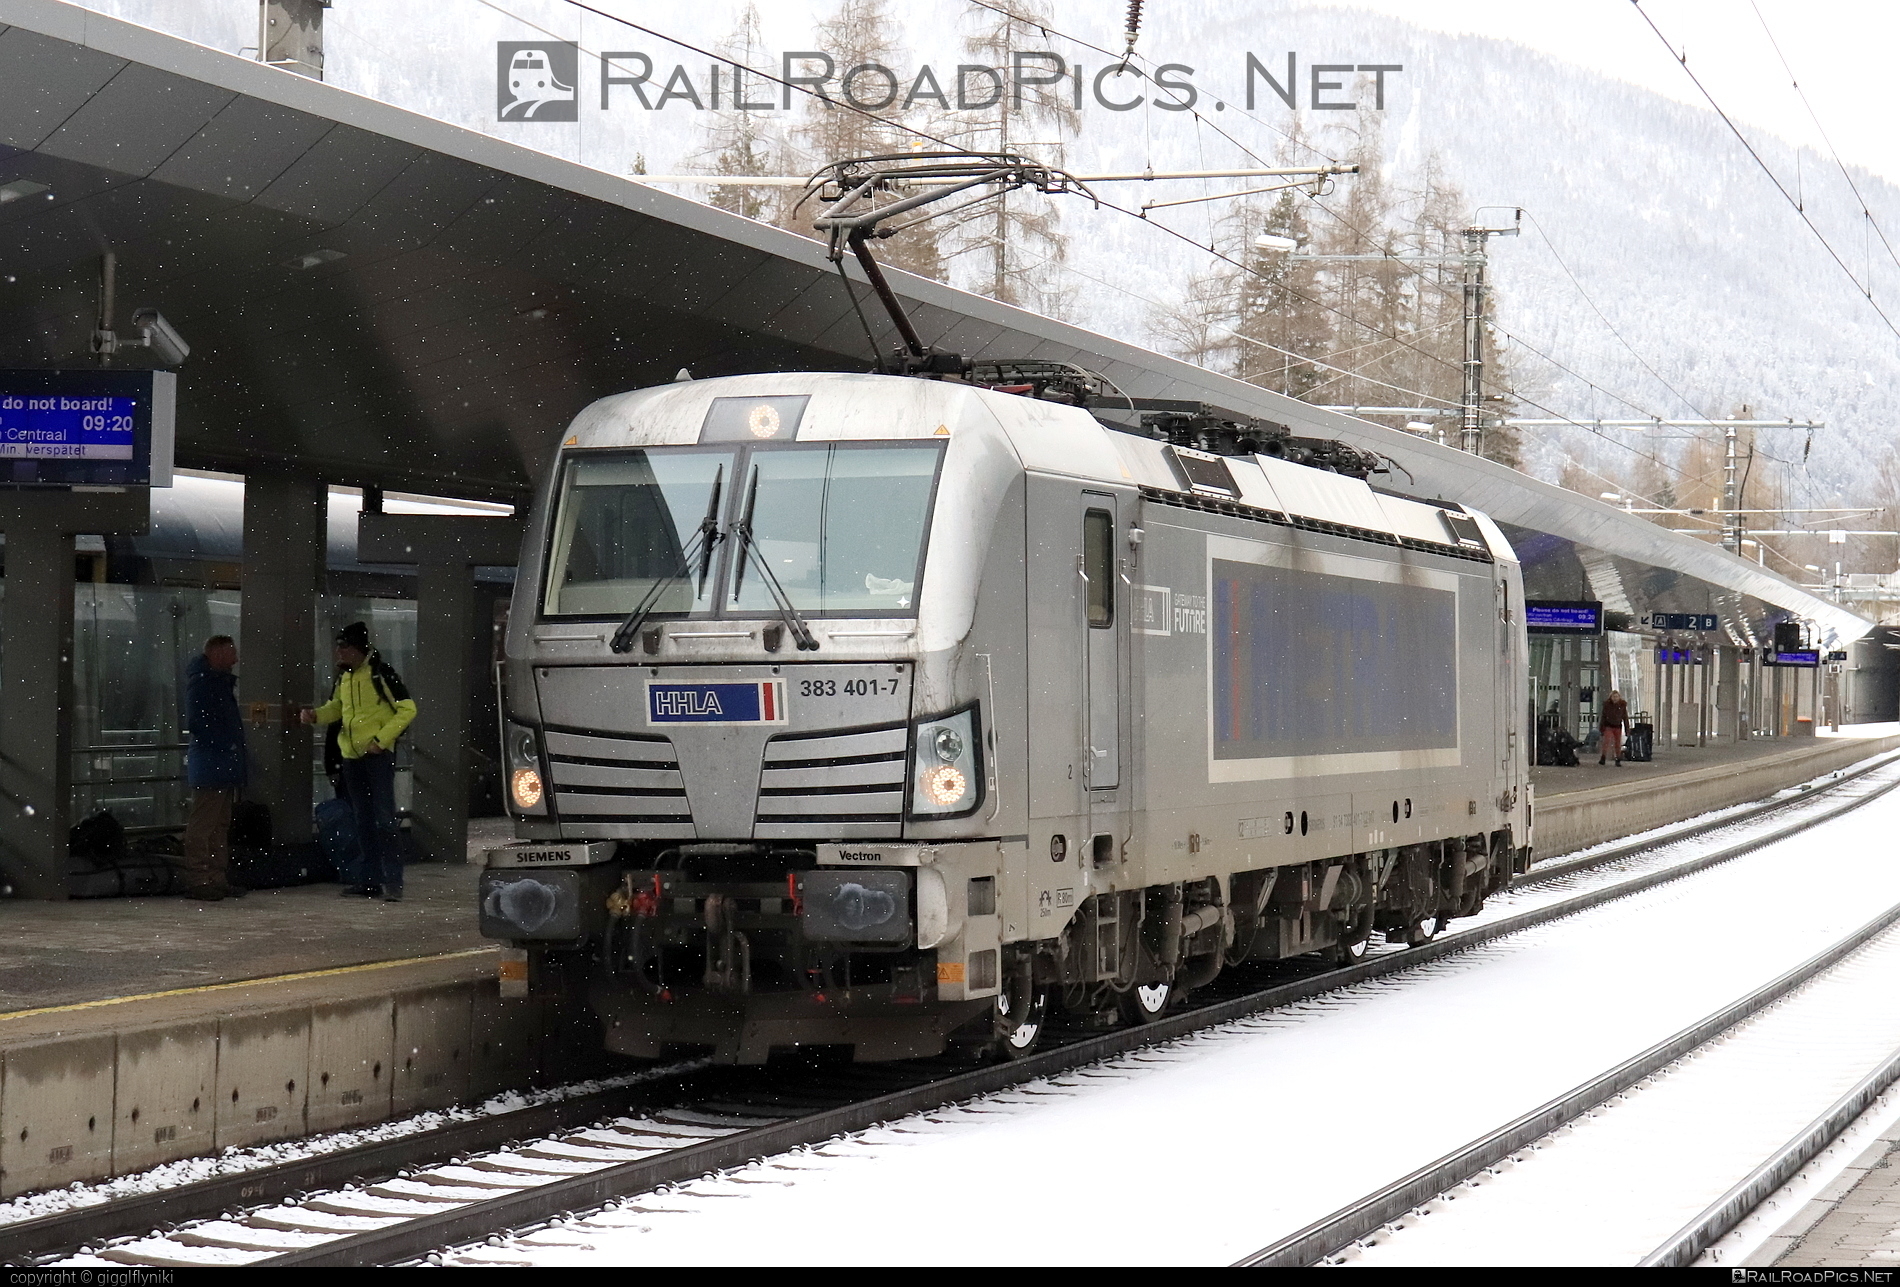 Siemens Vectron MS - 383 401-7 operated by METRANS, a.s. #hhla #metrans #siemens #siemensVectron #siemensVectronMS #vectron #vectronMS